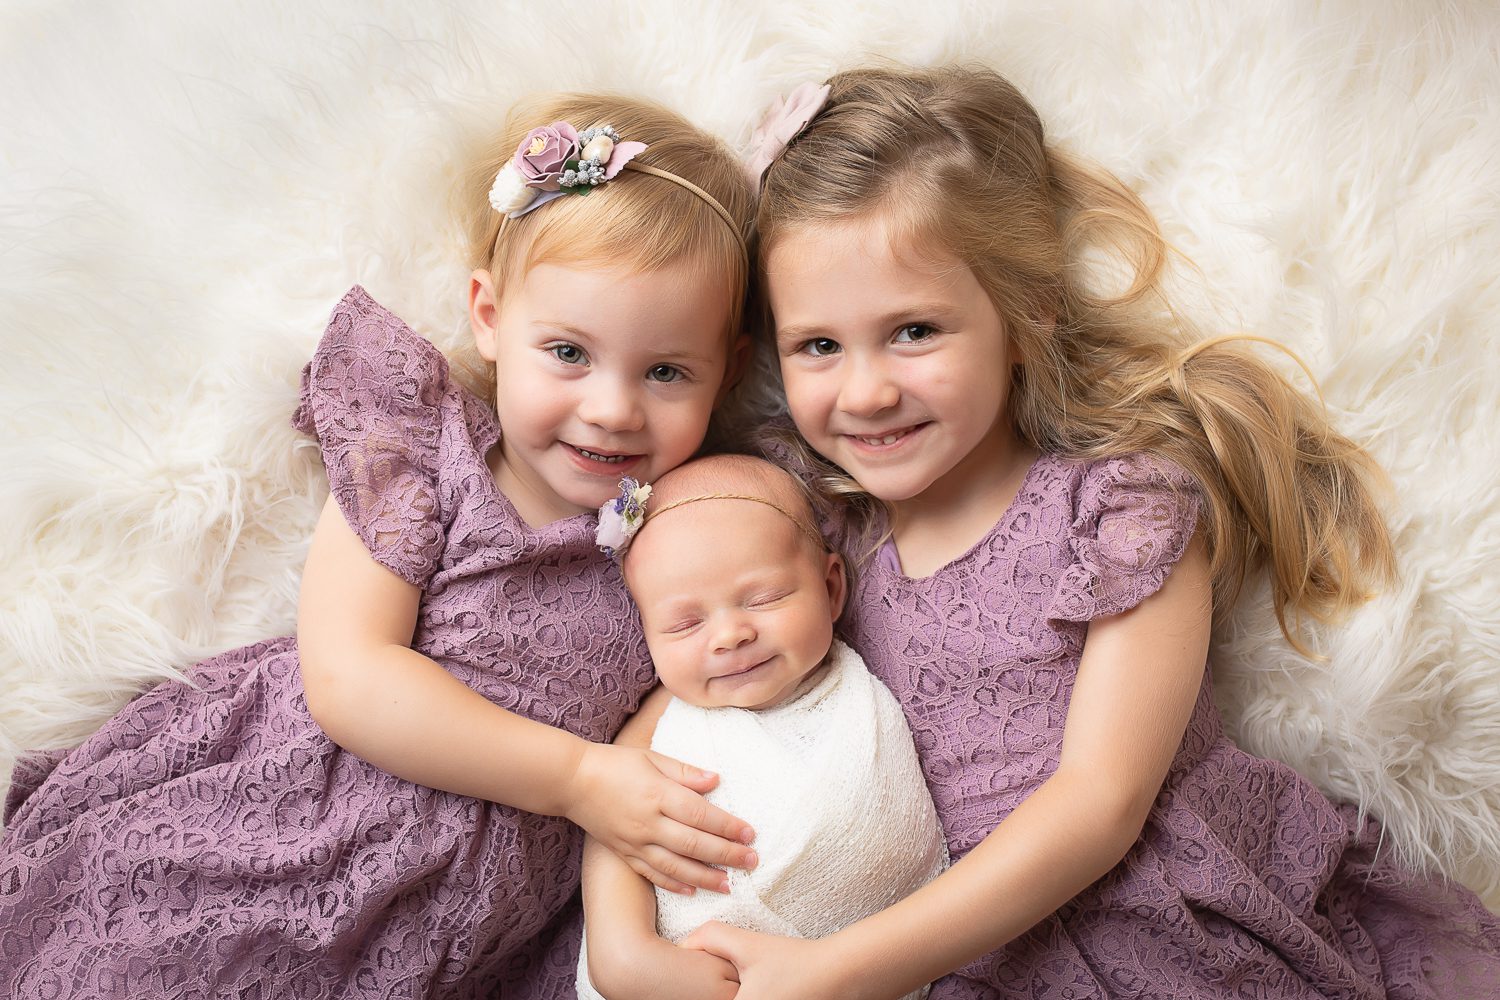 newborn photographer in rochester ny captures newborn baby girl smiling in her big sisters' arms